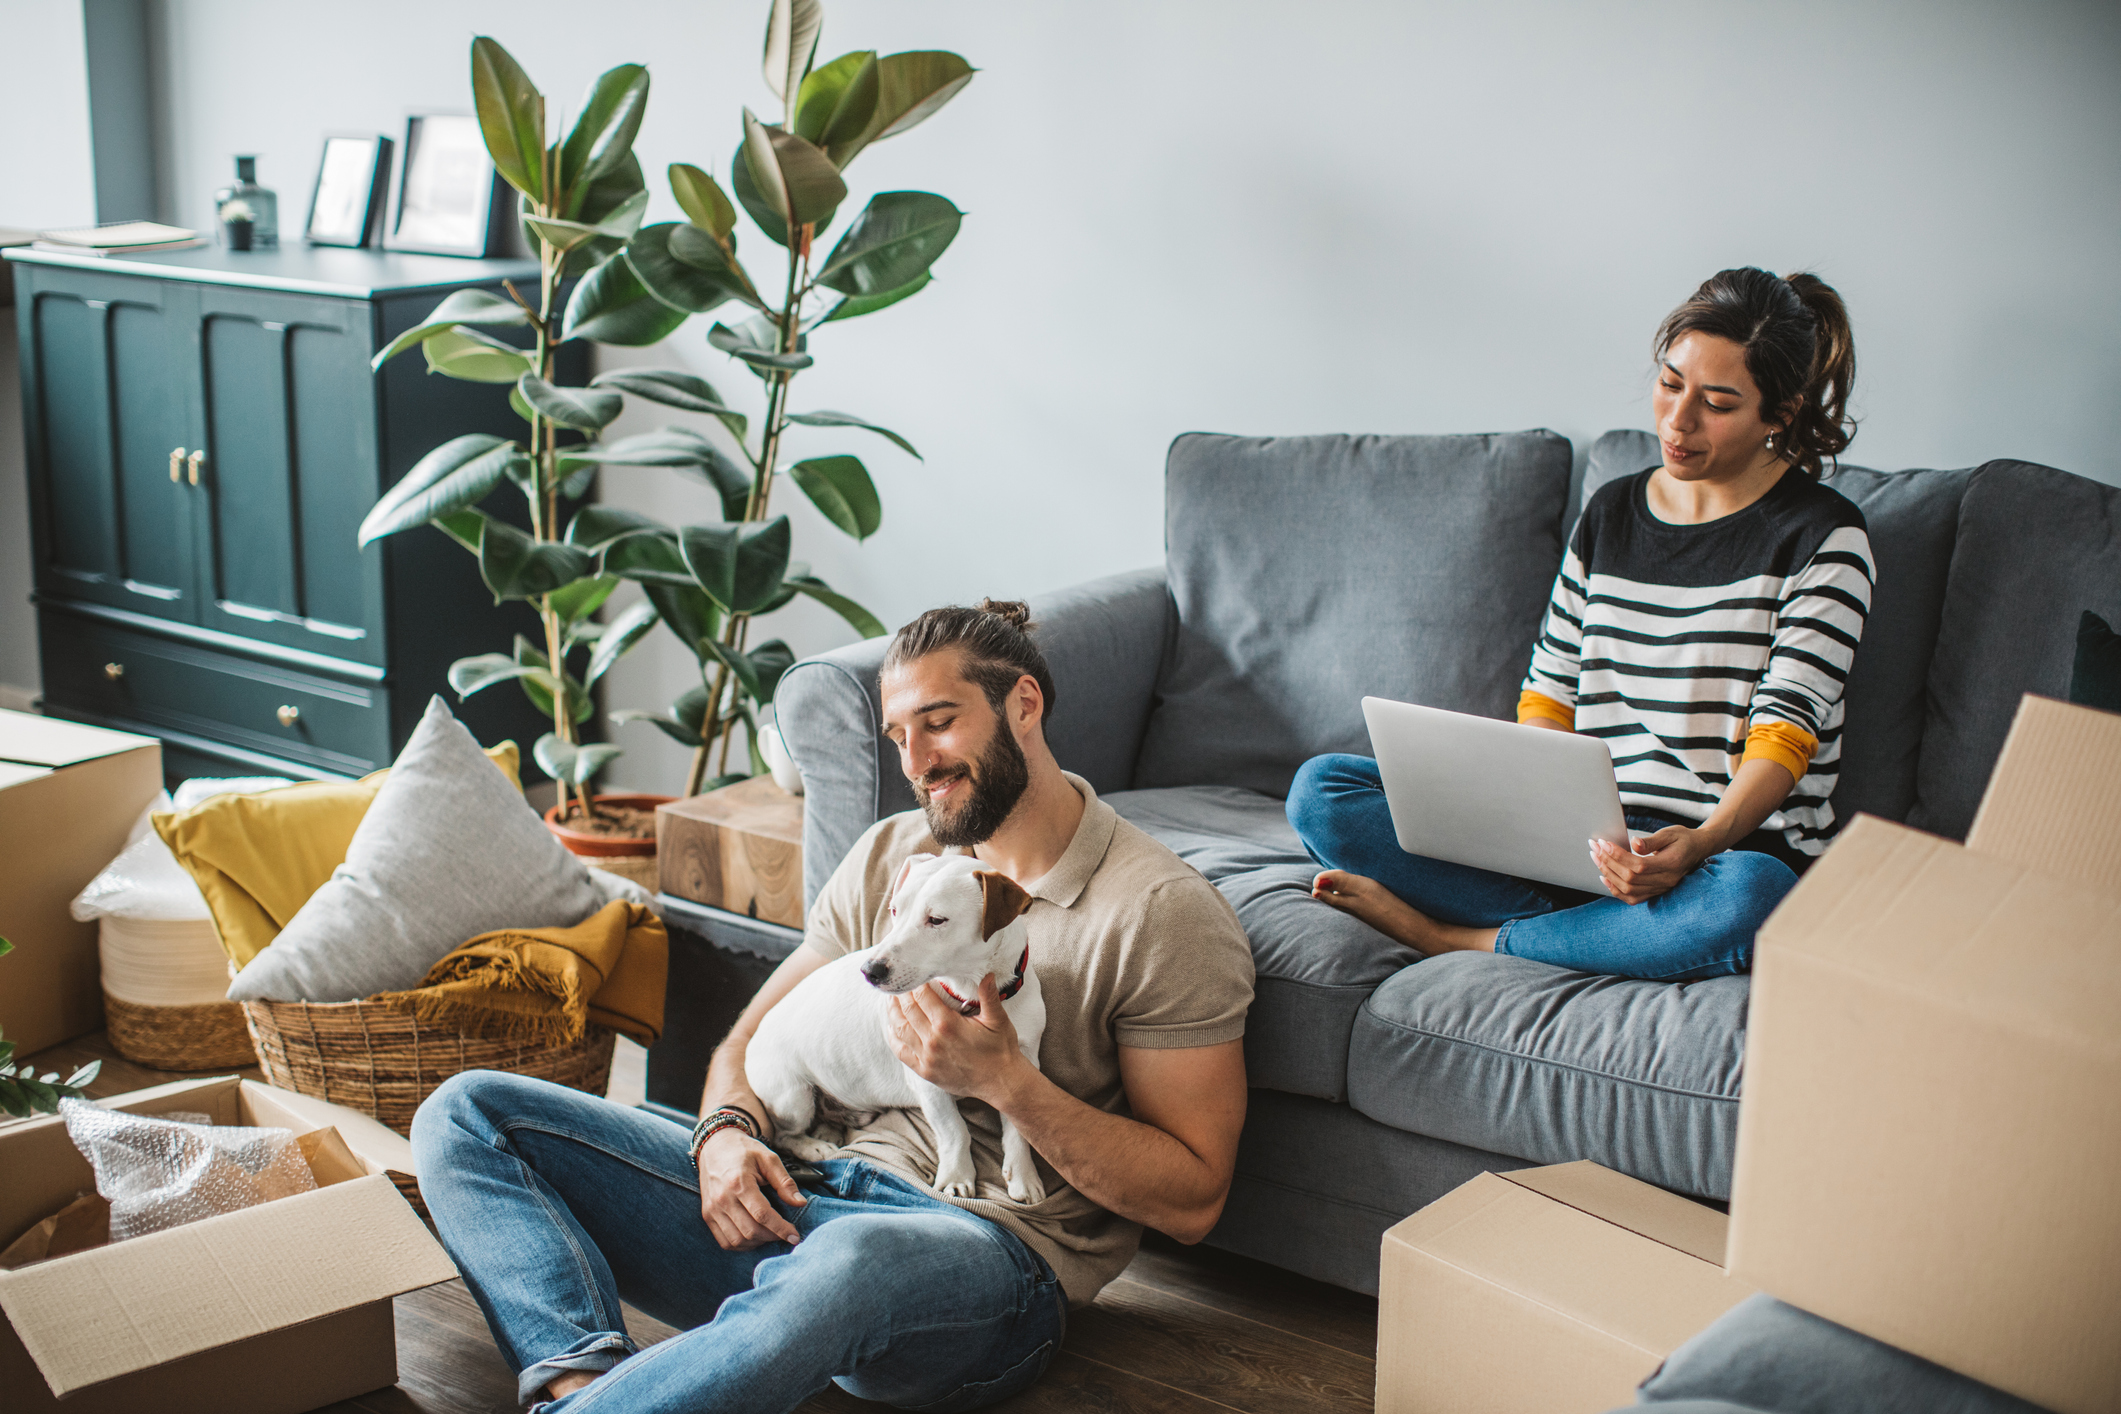 Couple with dog and moving boxes